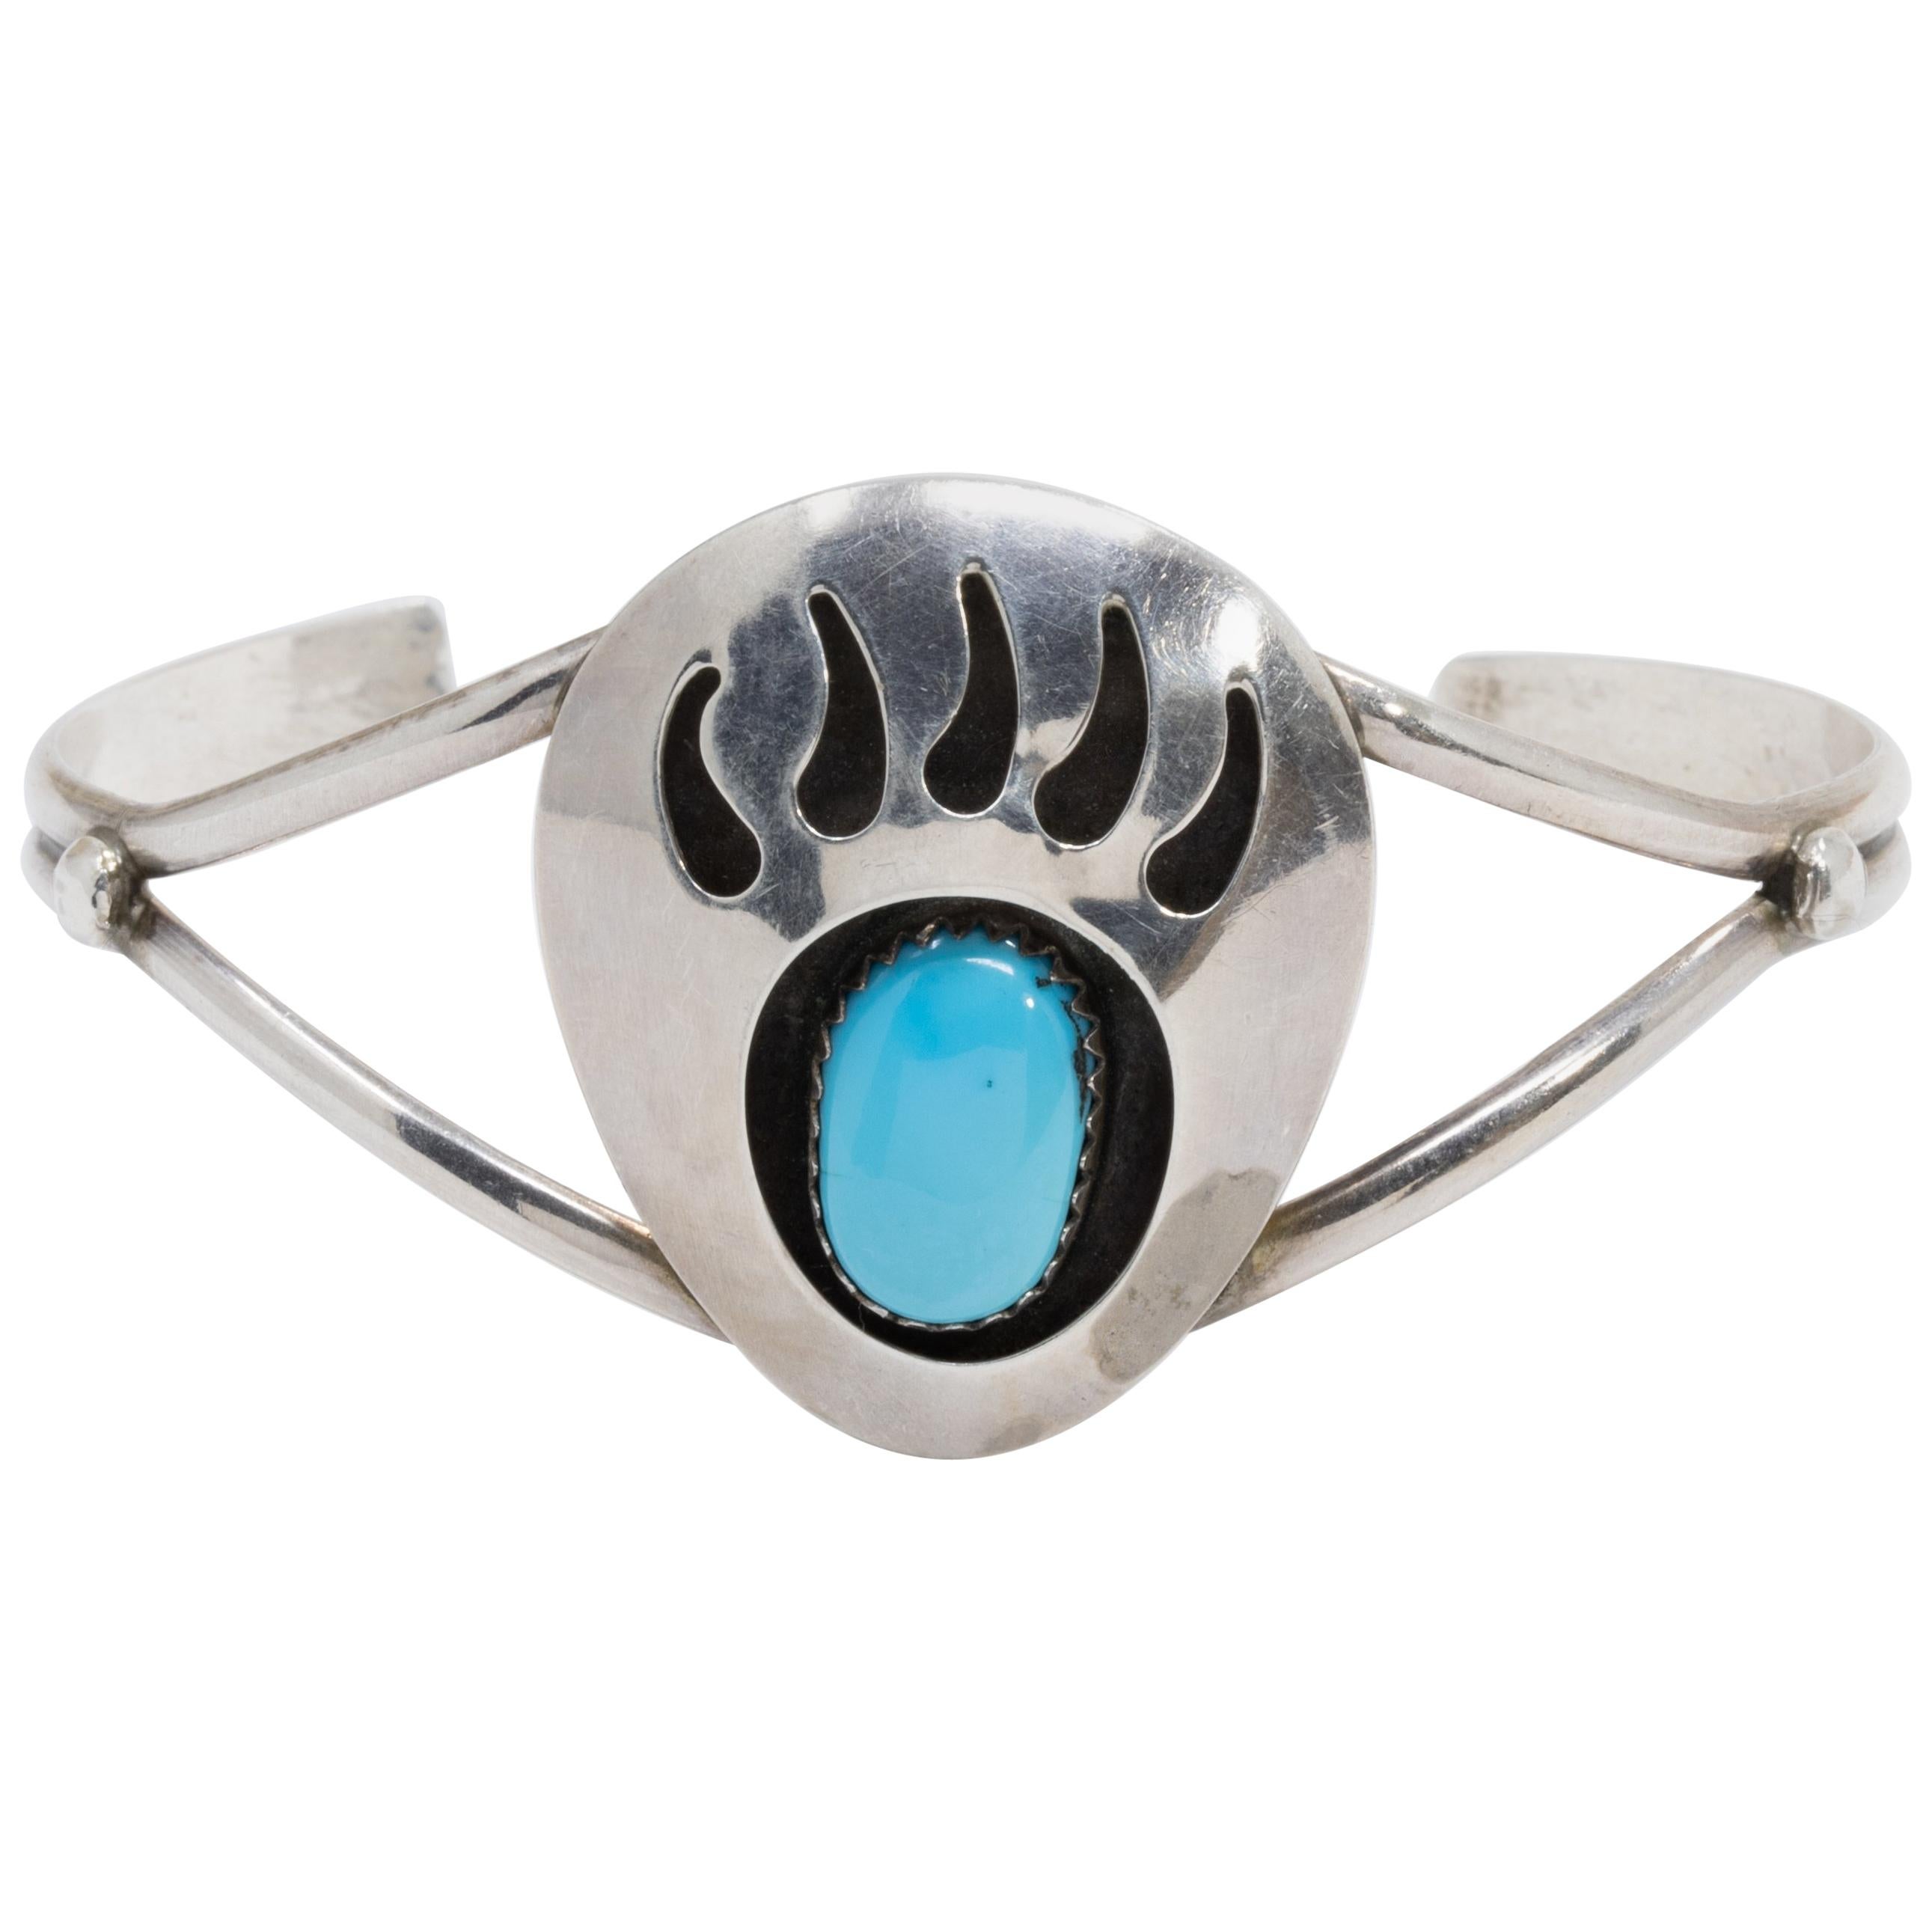 Native American Bear Claw Sterling Silver Tapered Cuff Bracelet with Turquoise